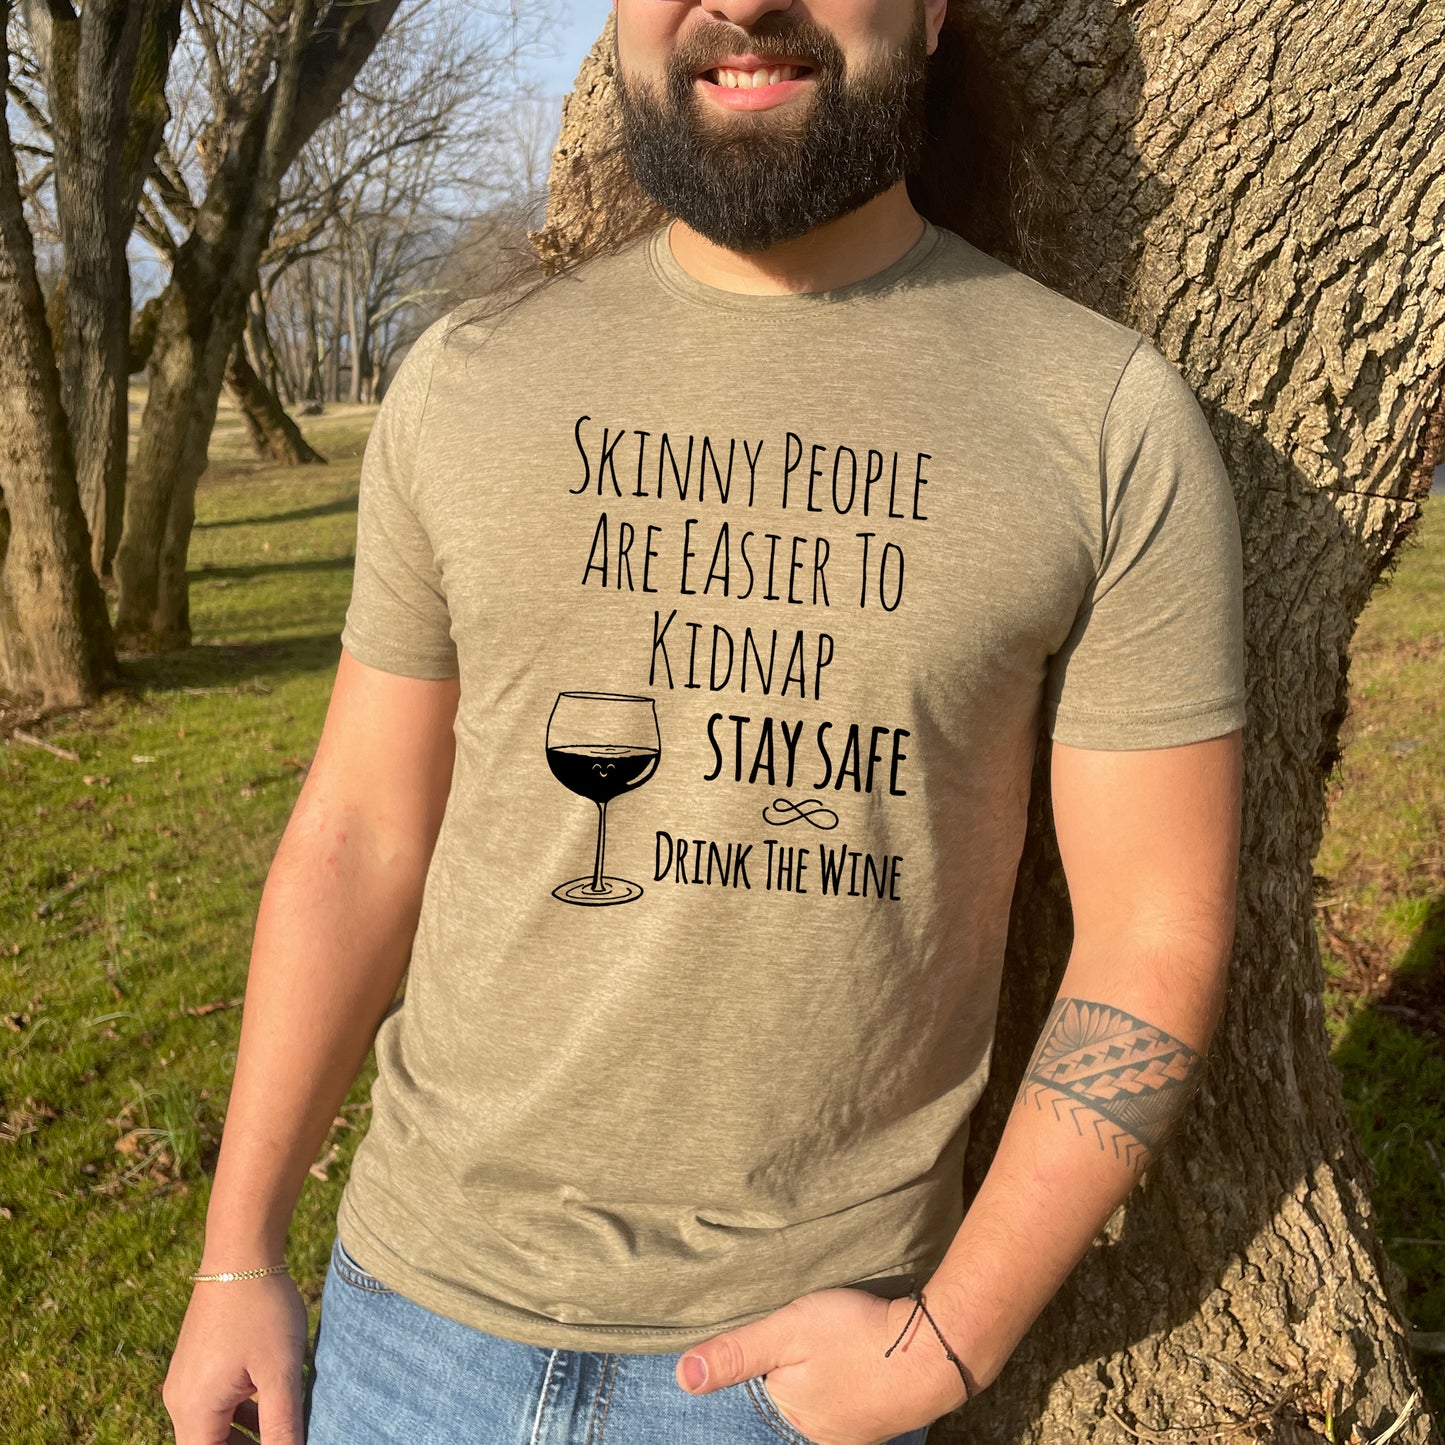 Skinny People Are Easier To Kidnap. Stay Safe. Drink The Wine - Men's / Unisex Tee - Stonewash Blue or Sage